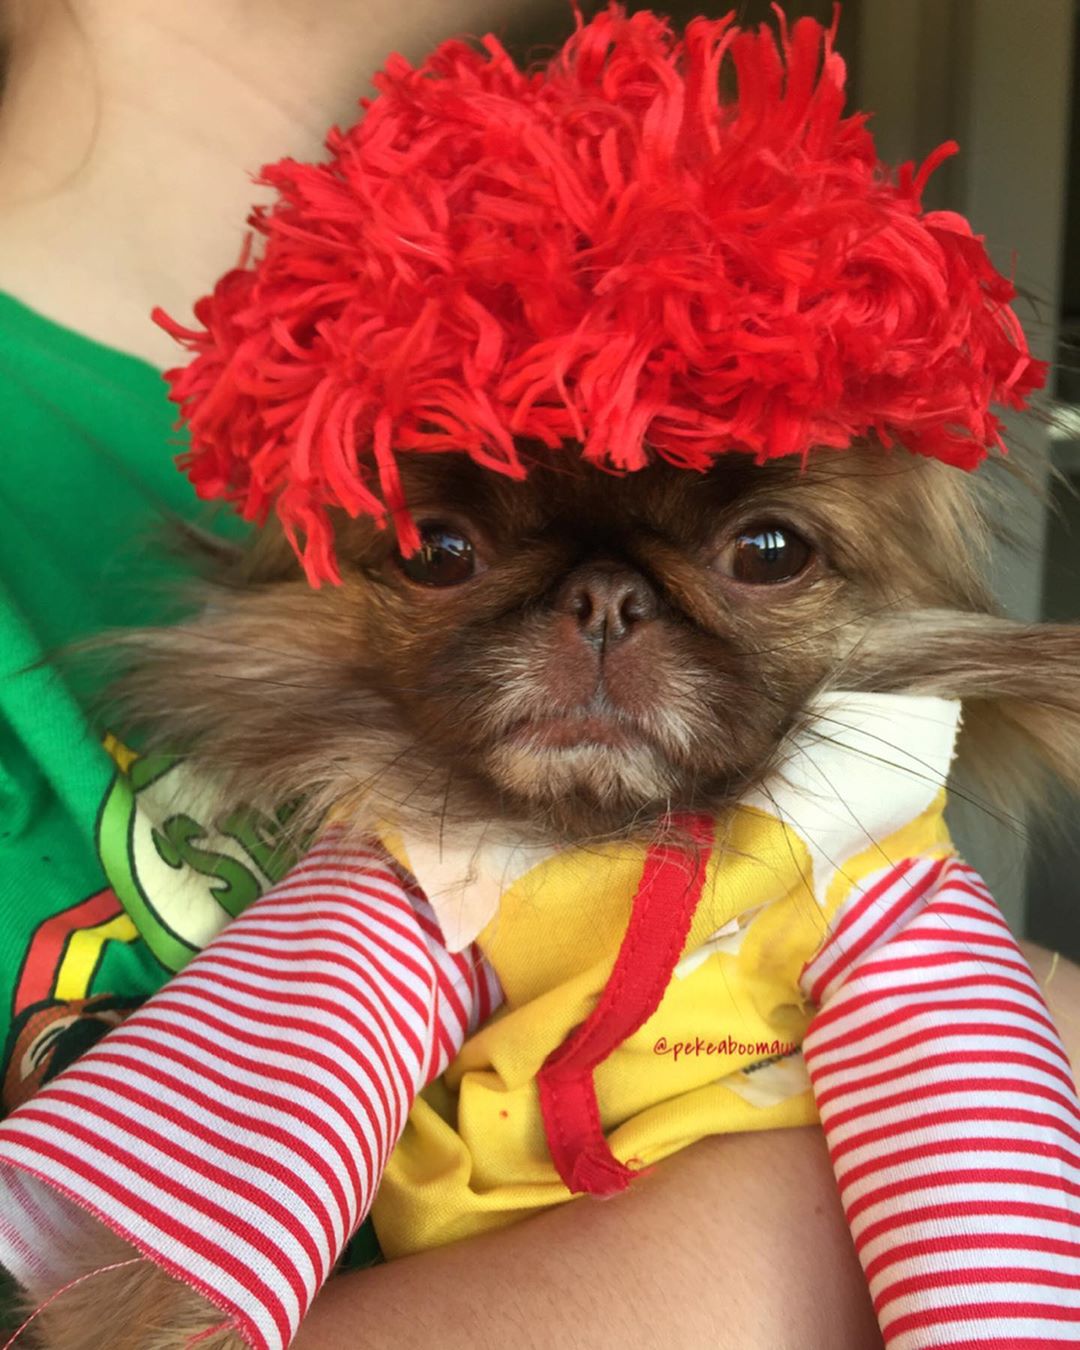 A Pekingese in McDonald's costume while being carried by a woman